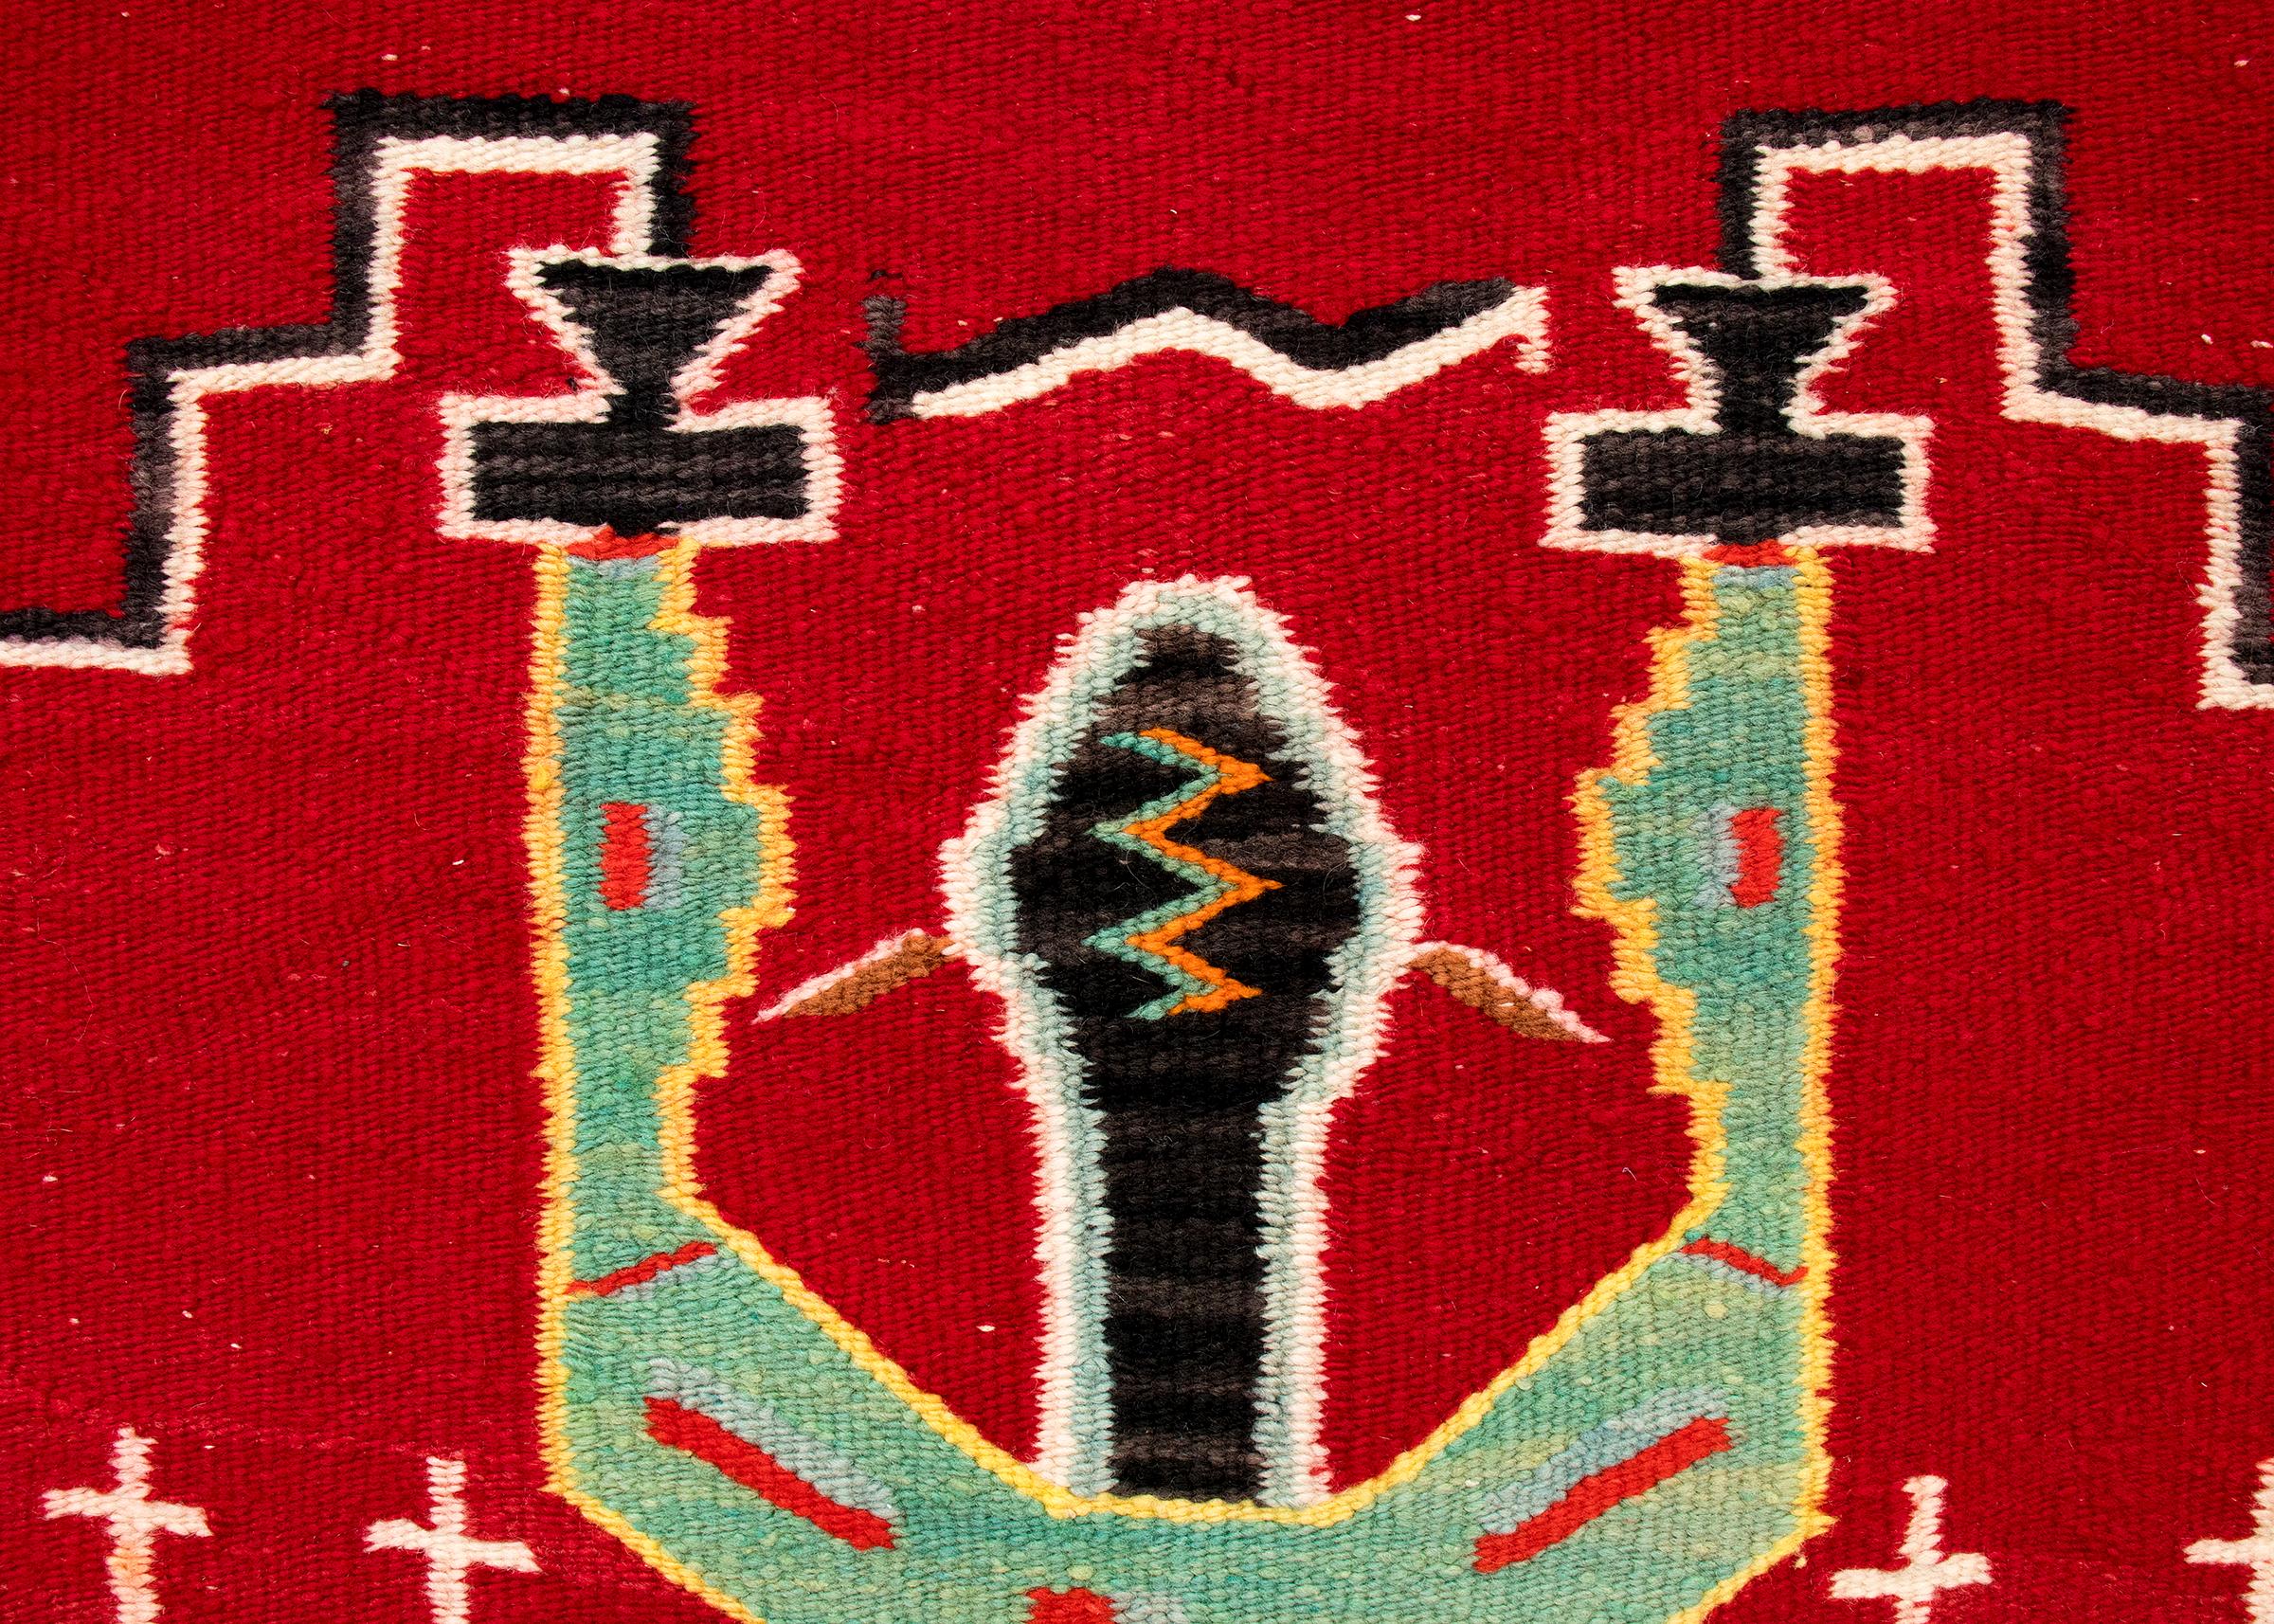 Hand-Woven Navajo Pictorial Weaving with Thunder Gods, Vintage Circa 1950, Red Yellow Green